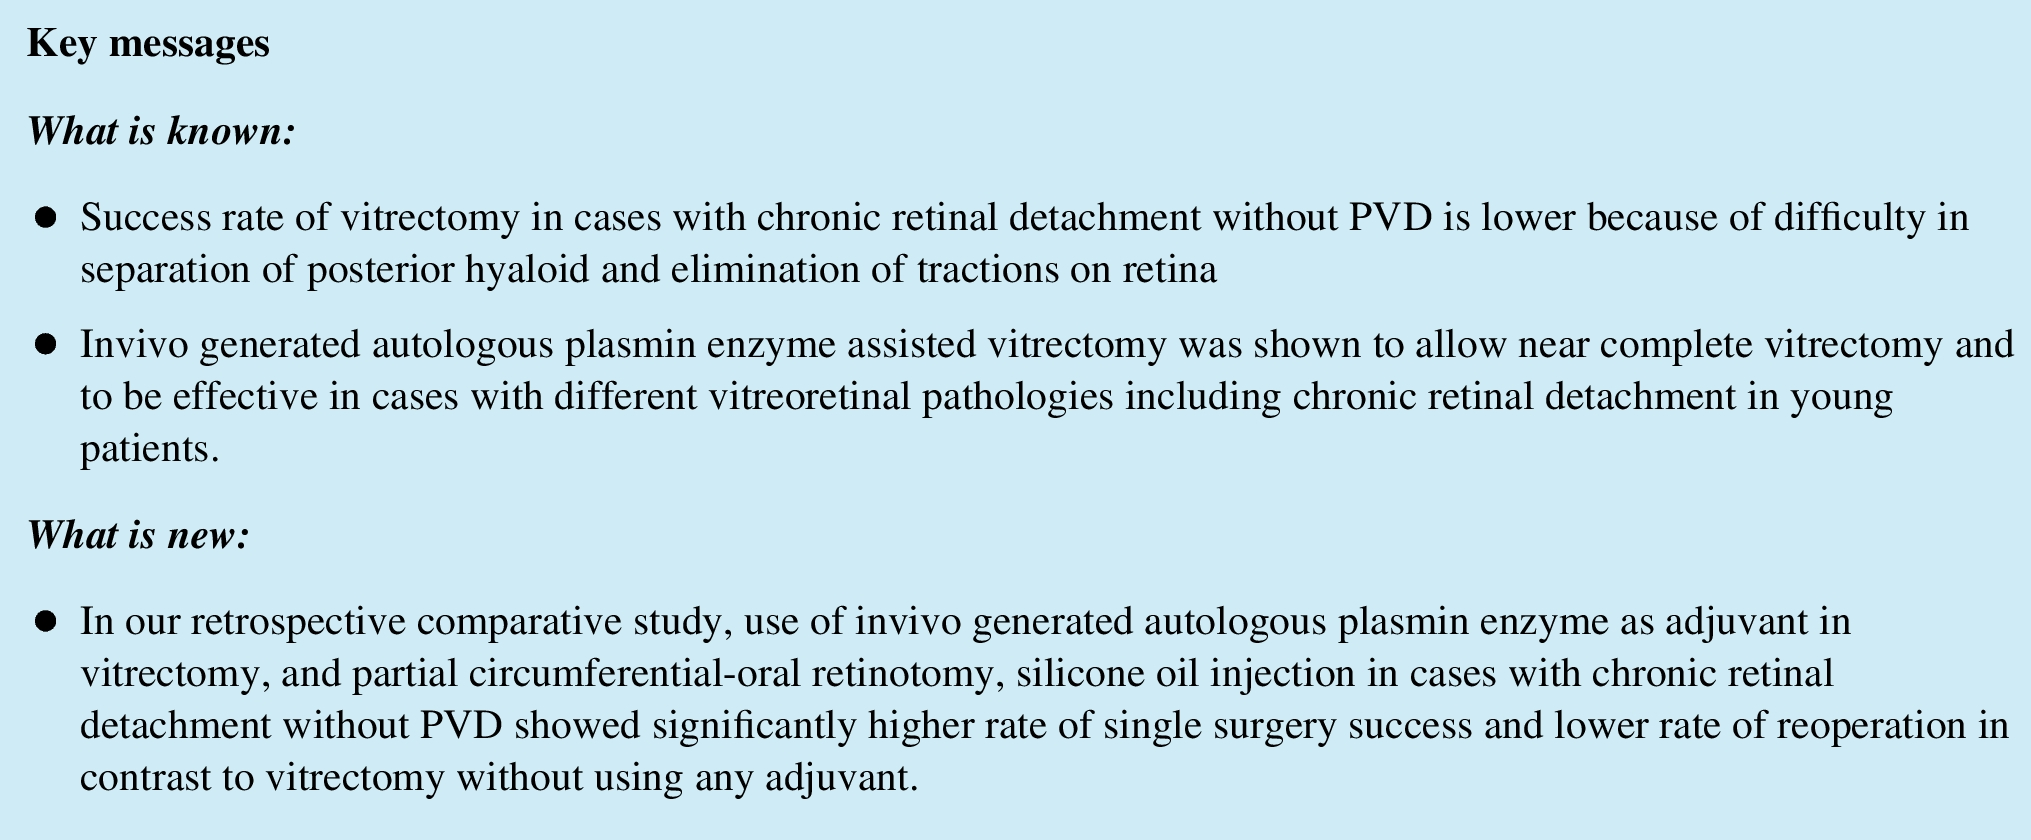 Invivo generated autologous plasmin enzyme assisted vitrectomy, partial circumferential-oral retinotomy, silicone oil injection in patients with chronic retinal detachment without posterior vitreous detachment